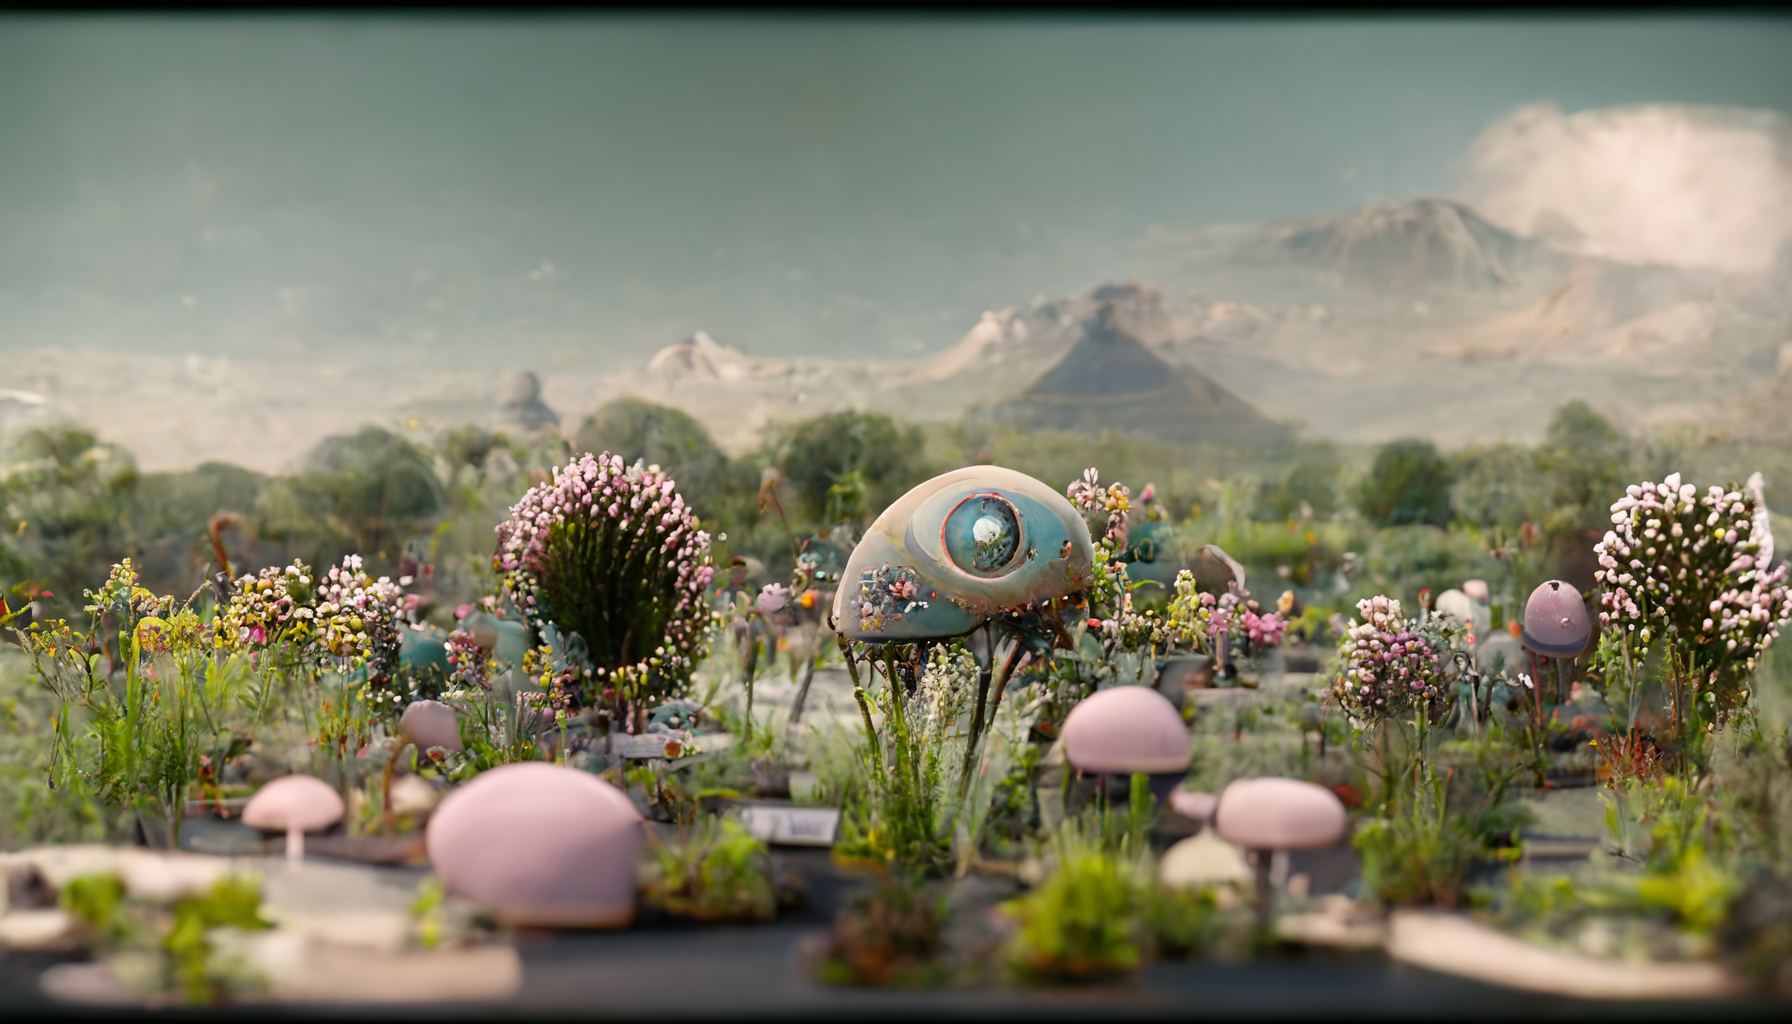 ZenithWombat_A_superrealistic_botanical_garden_designed_by_hier_f80d0839-5fac-4e50-ae00-dfe63333debf.png